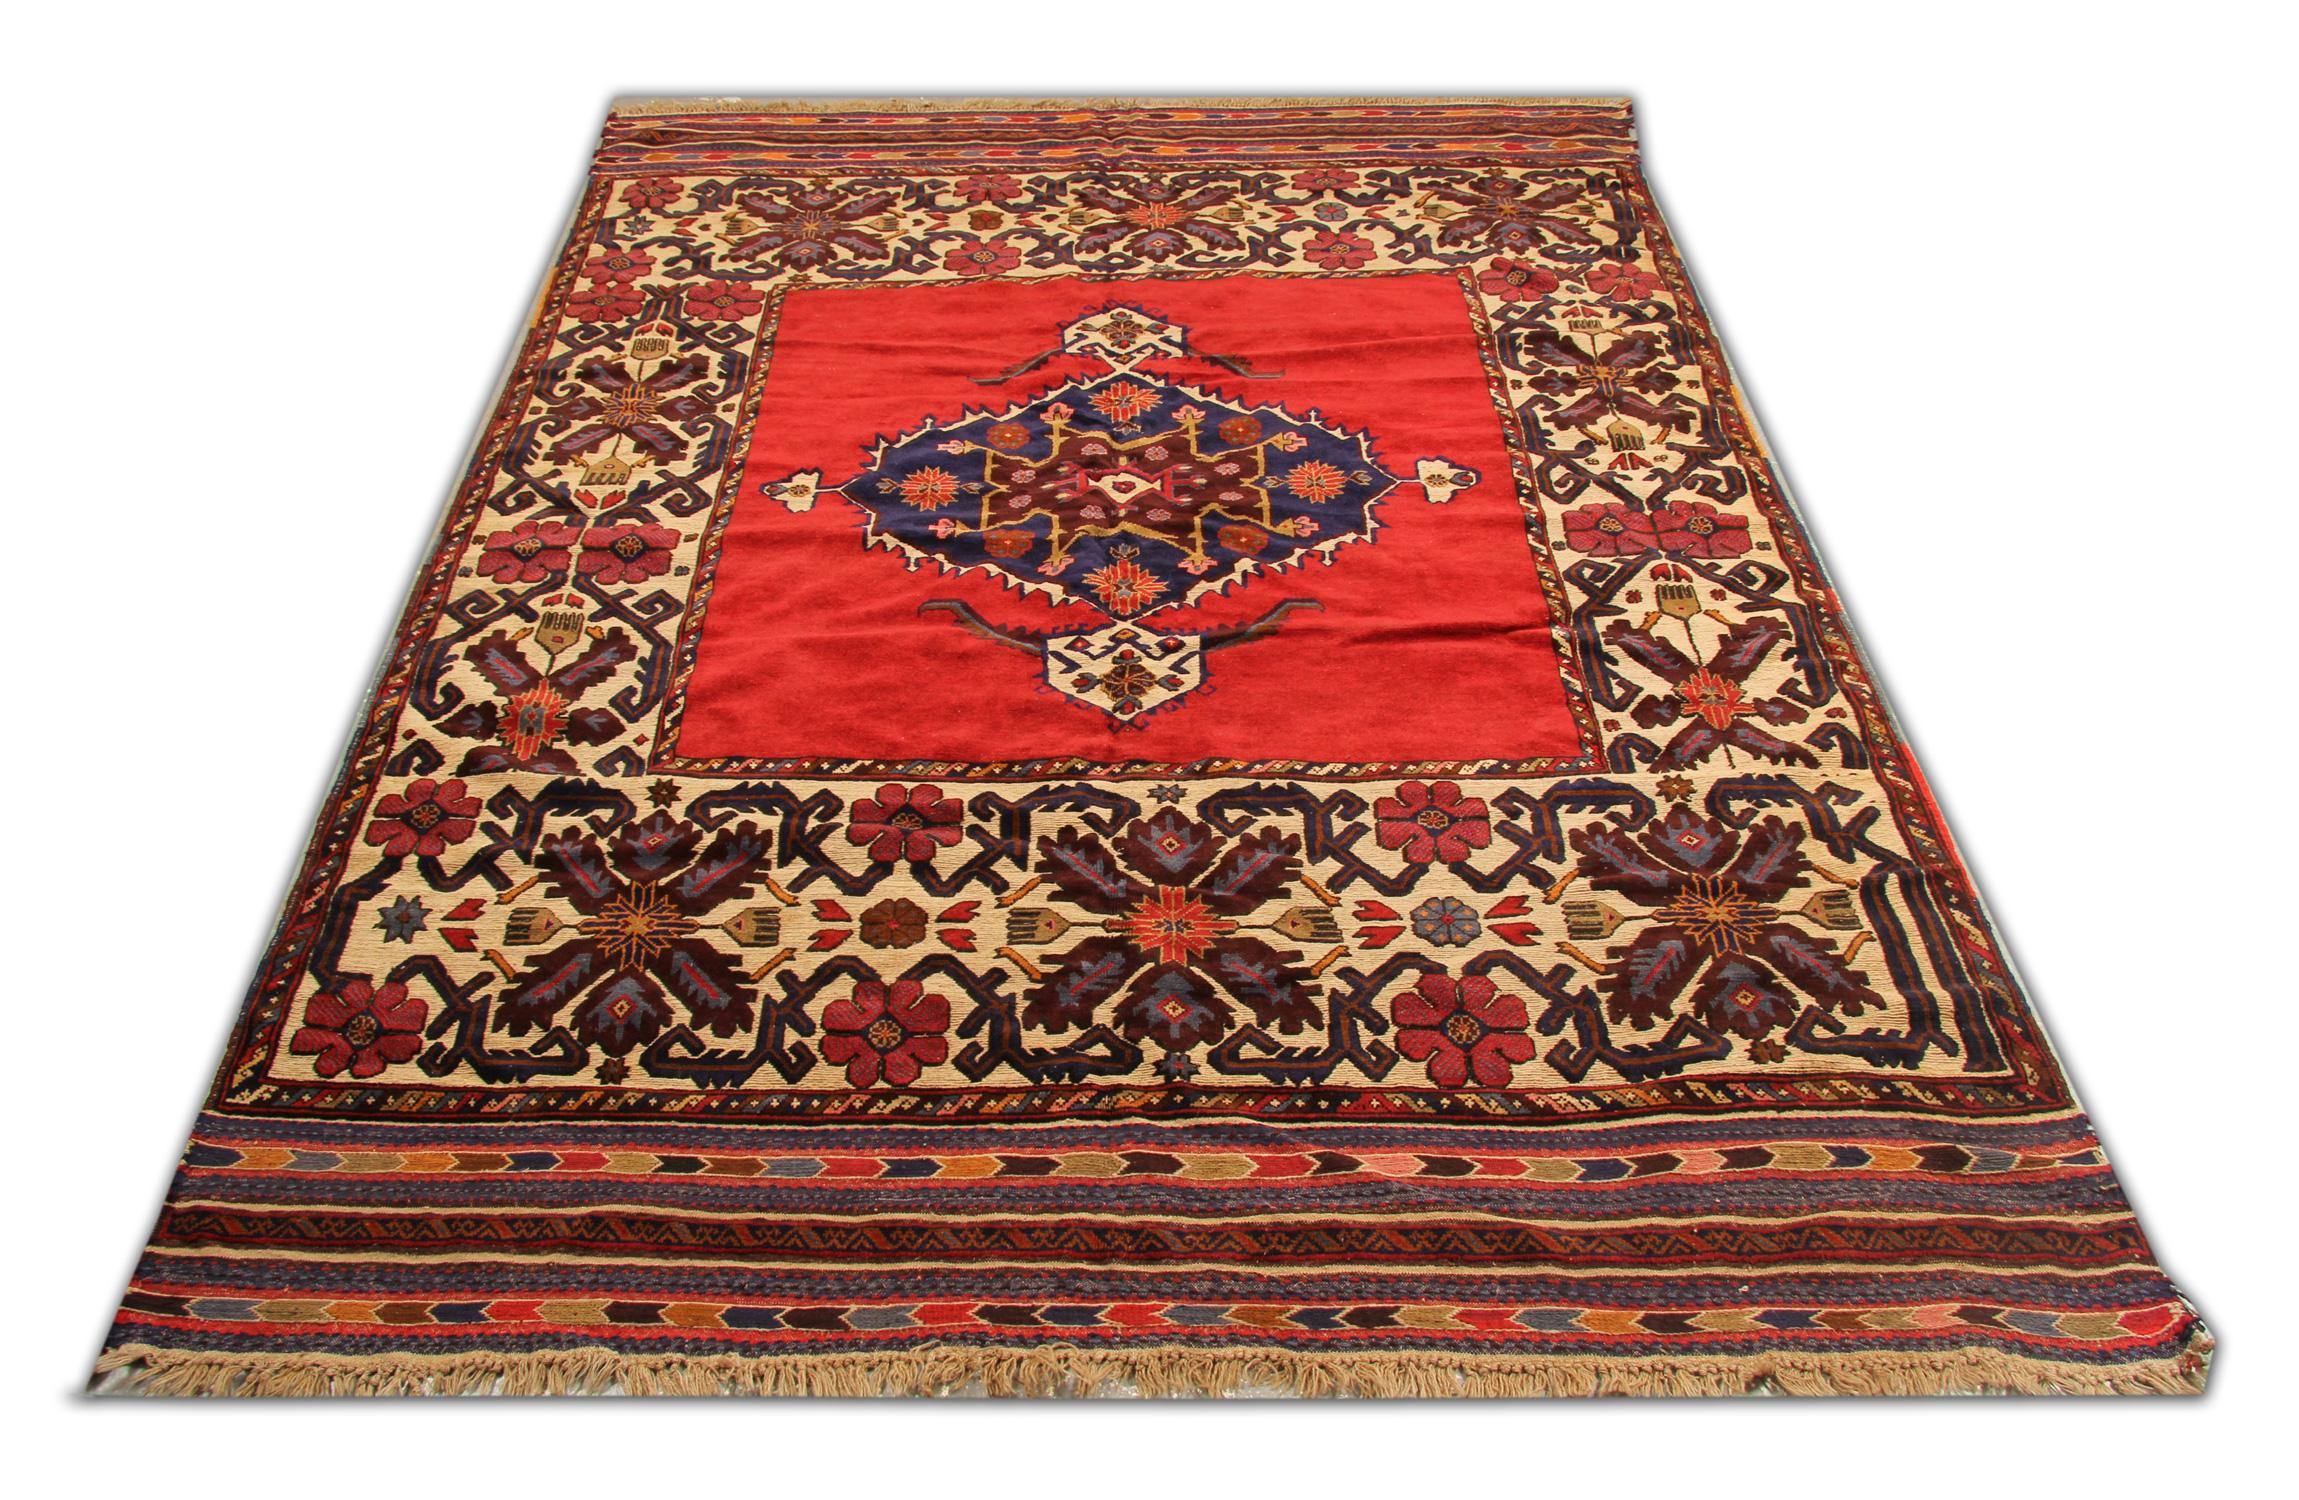 This elegant handwoven wool area rug features a beautiful central medallion woven on a red field with a decorative floral surround and linear border. Both the color and design of this piece make it the perfect accent piece for any home